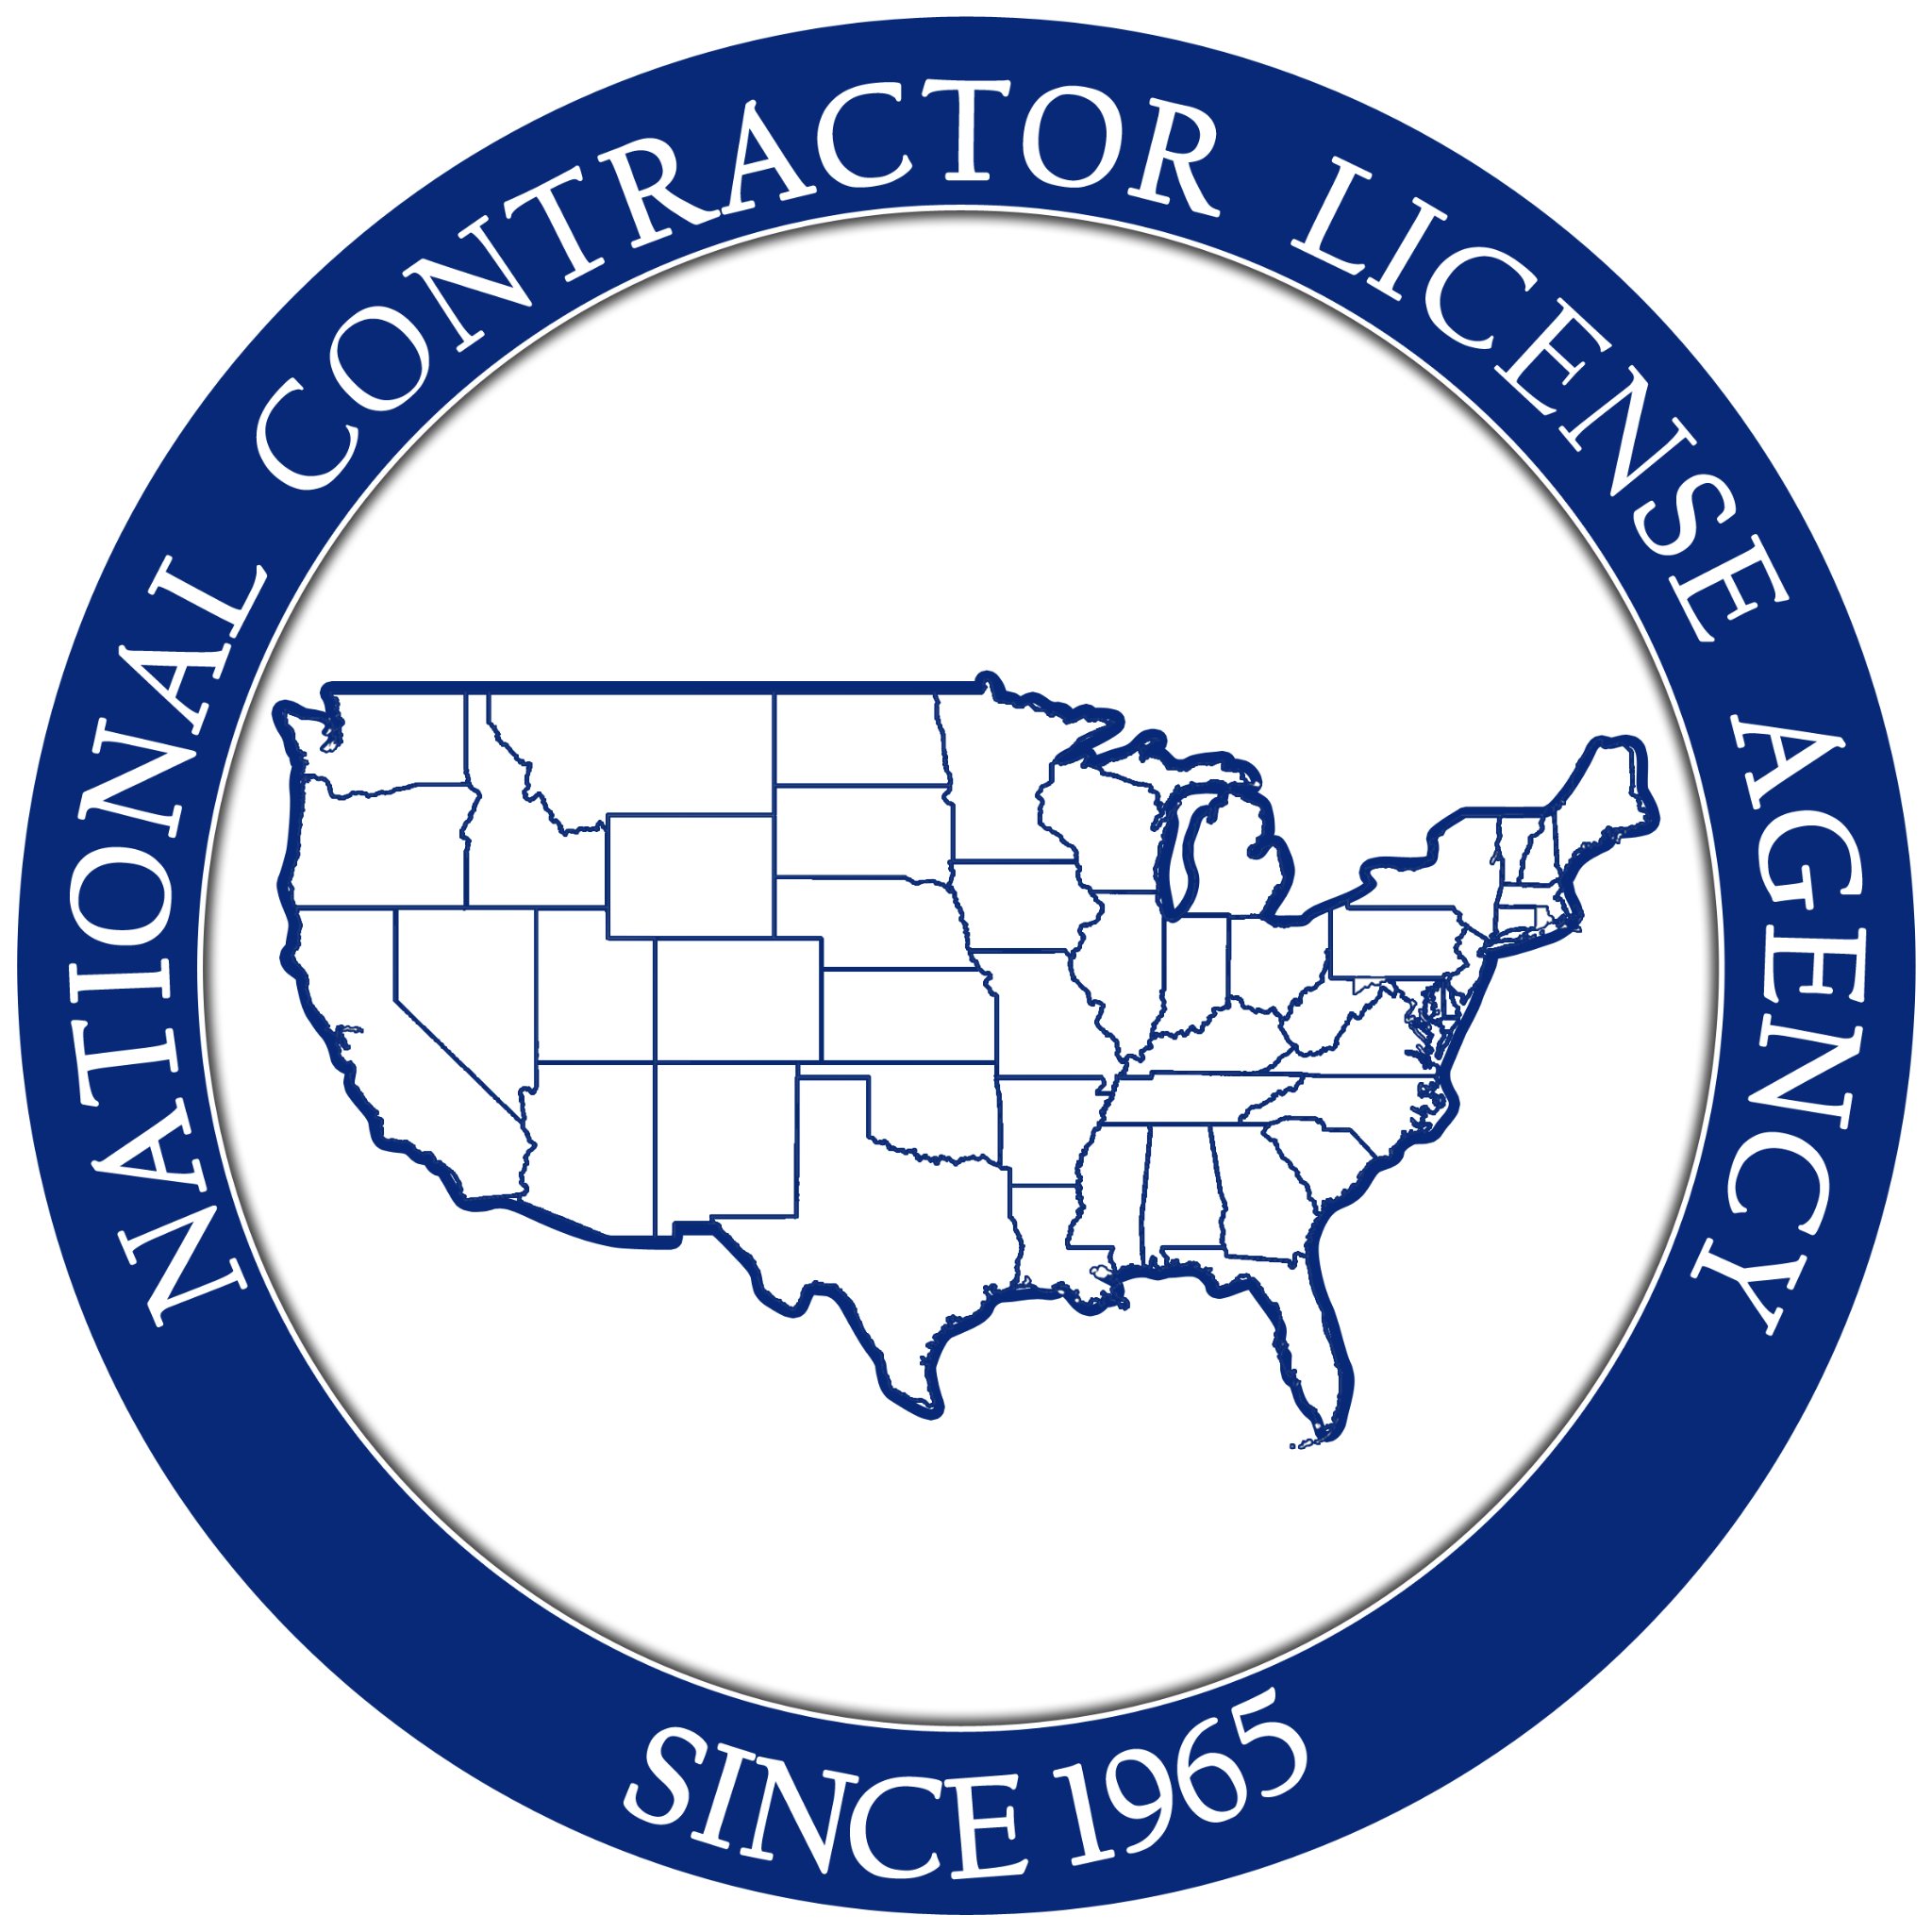 For contractors to find reliable info & assistance to properly establish biz entities, obtain contractors licences, expand to new states, & build value in biz.